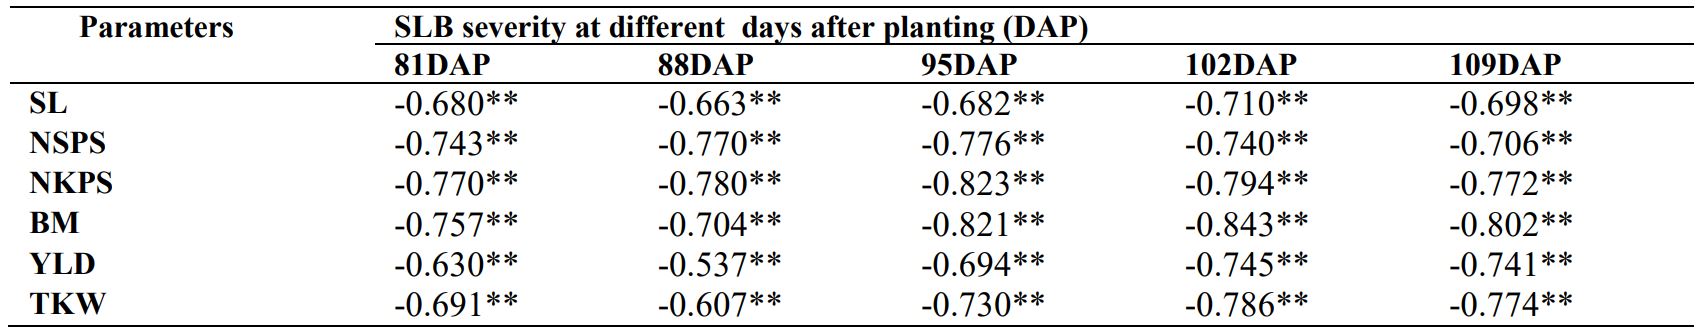 Genotypic variations in yield components of wheat at different crop growth stages